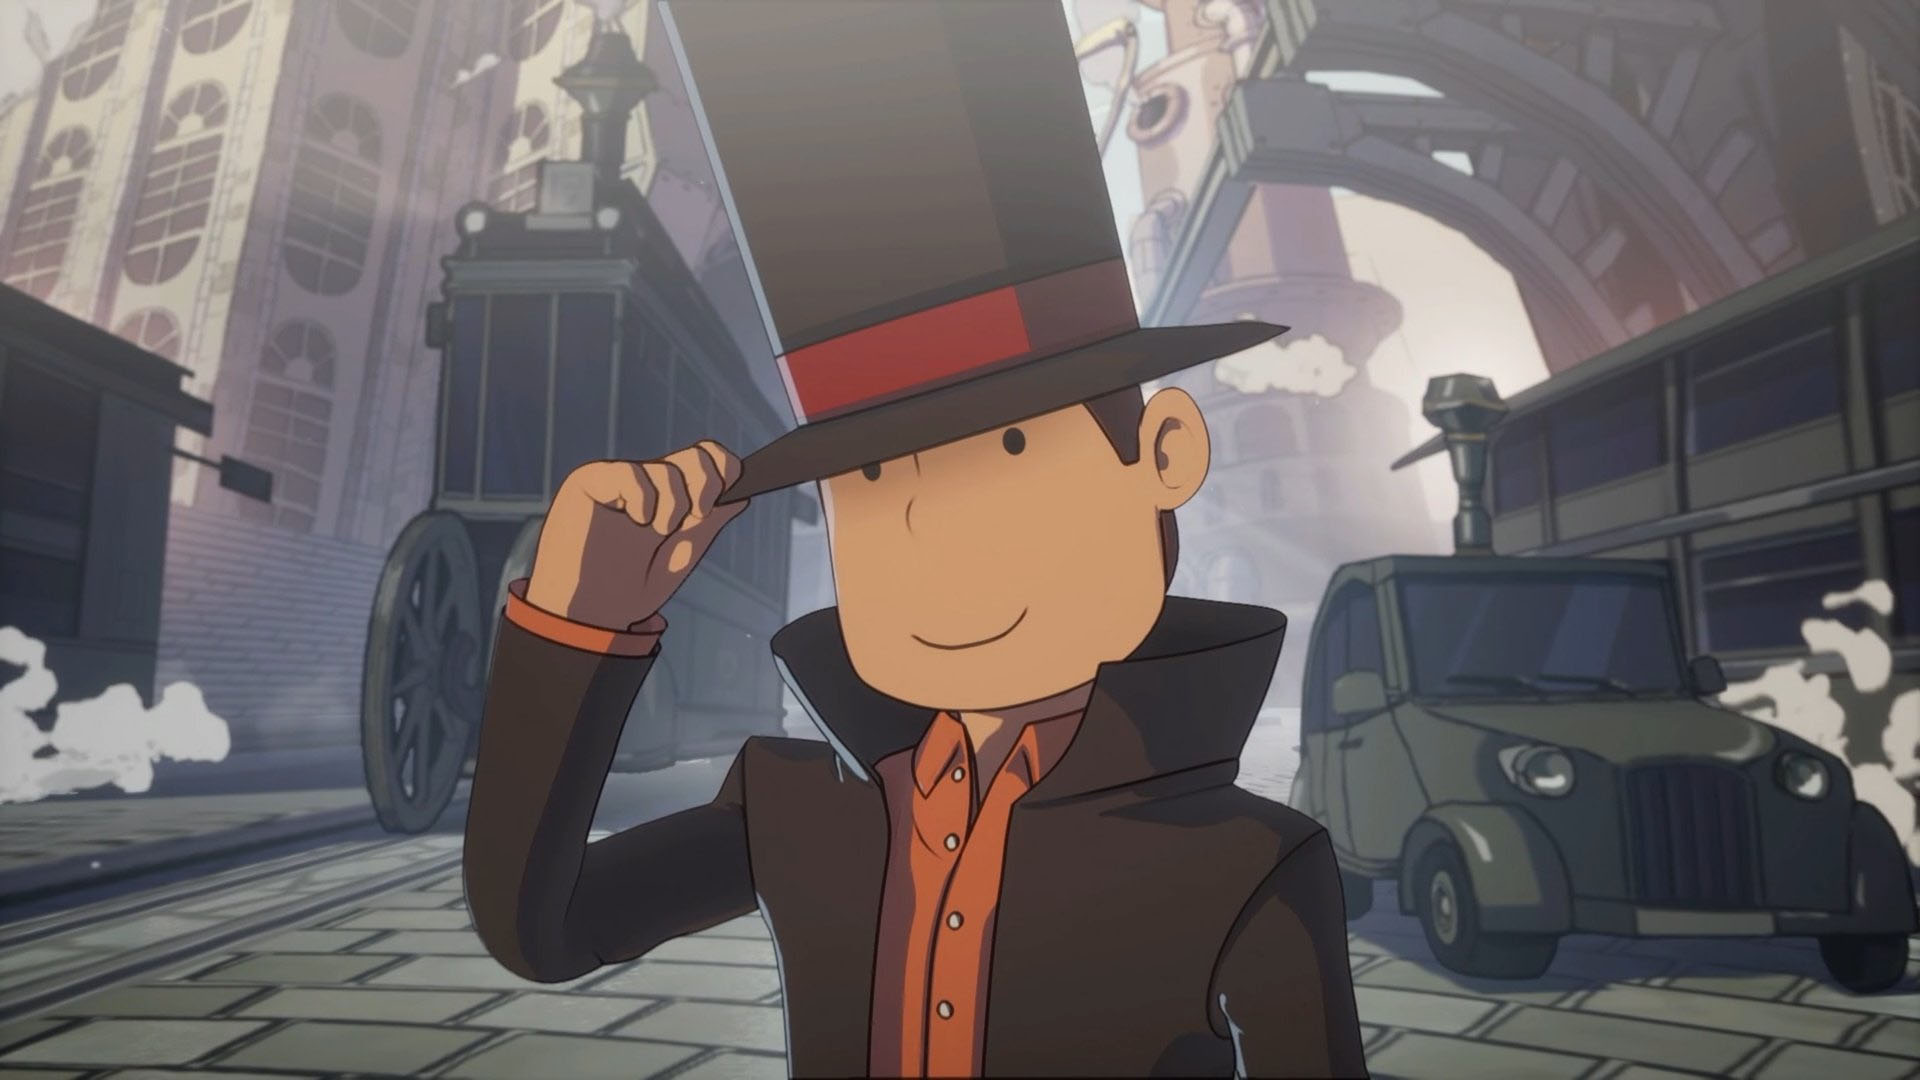 Professor Layton and The New World of Steam announced